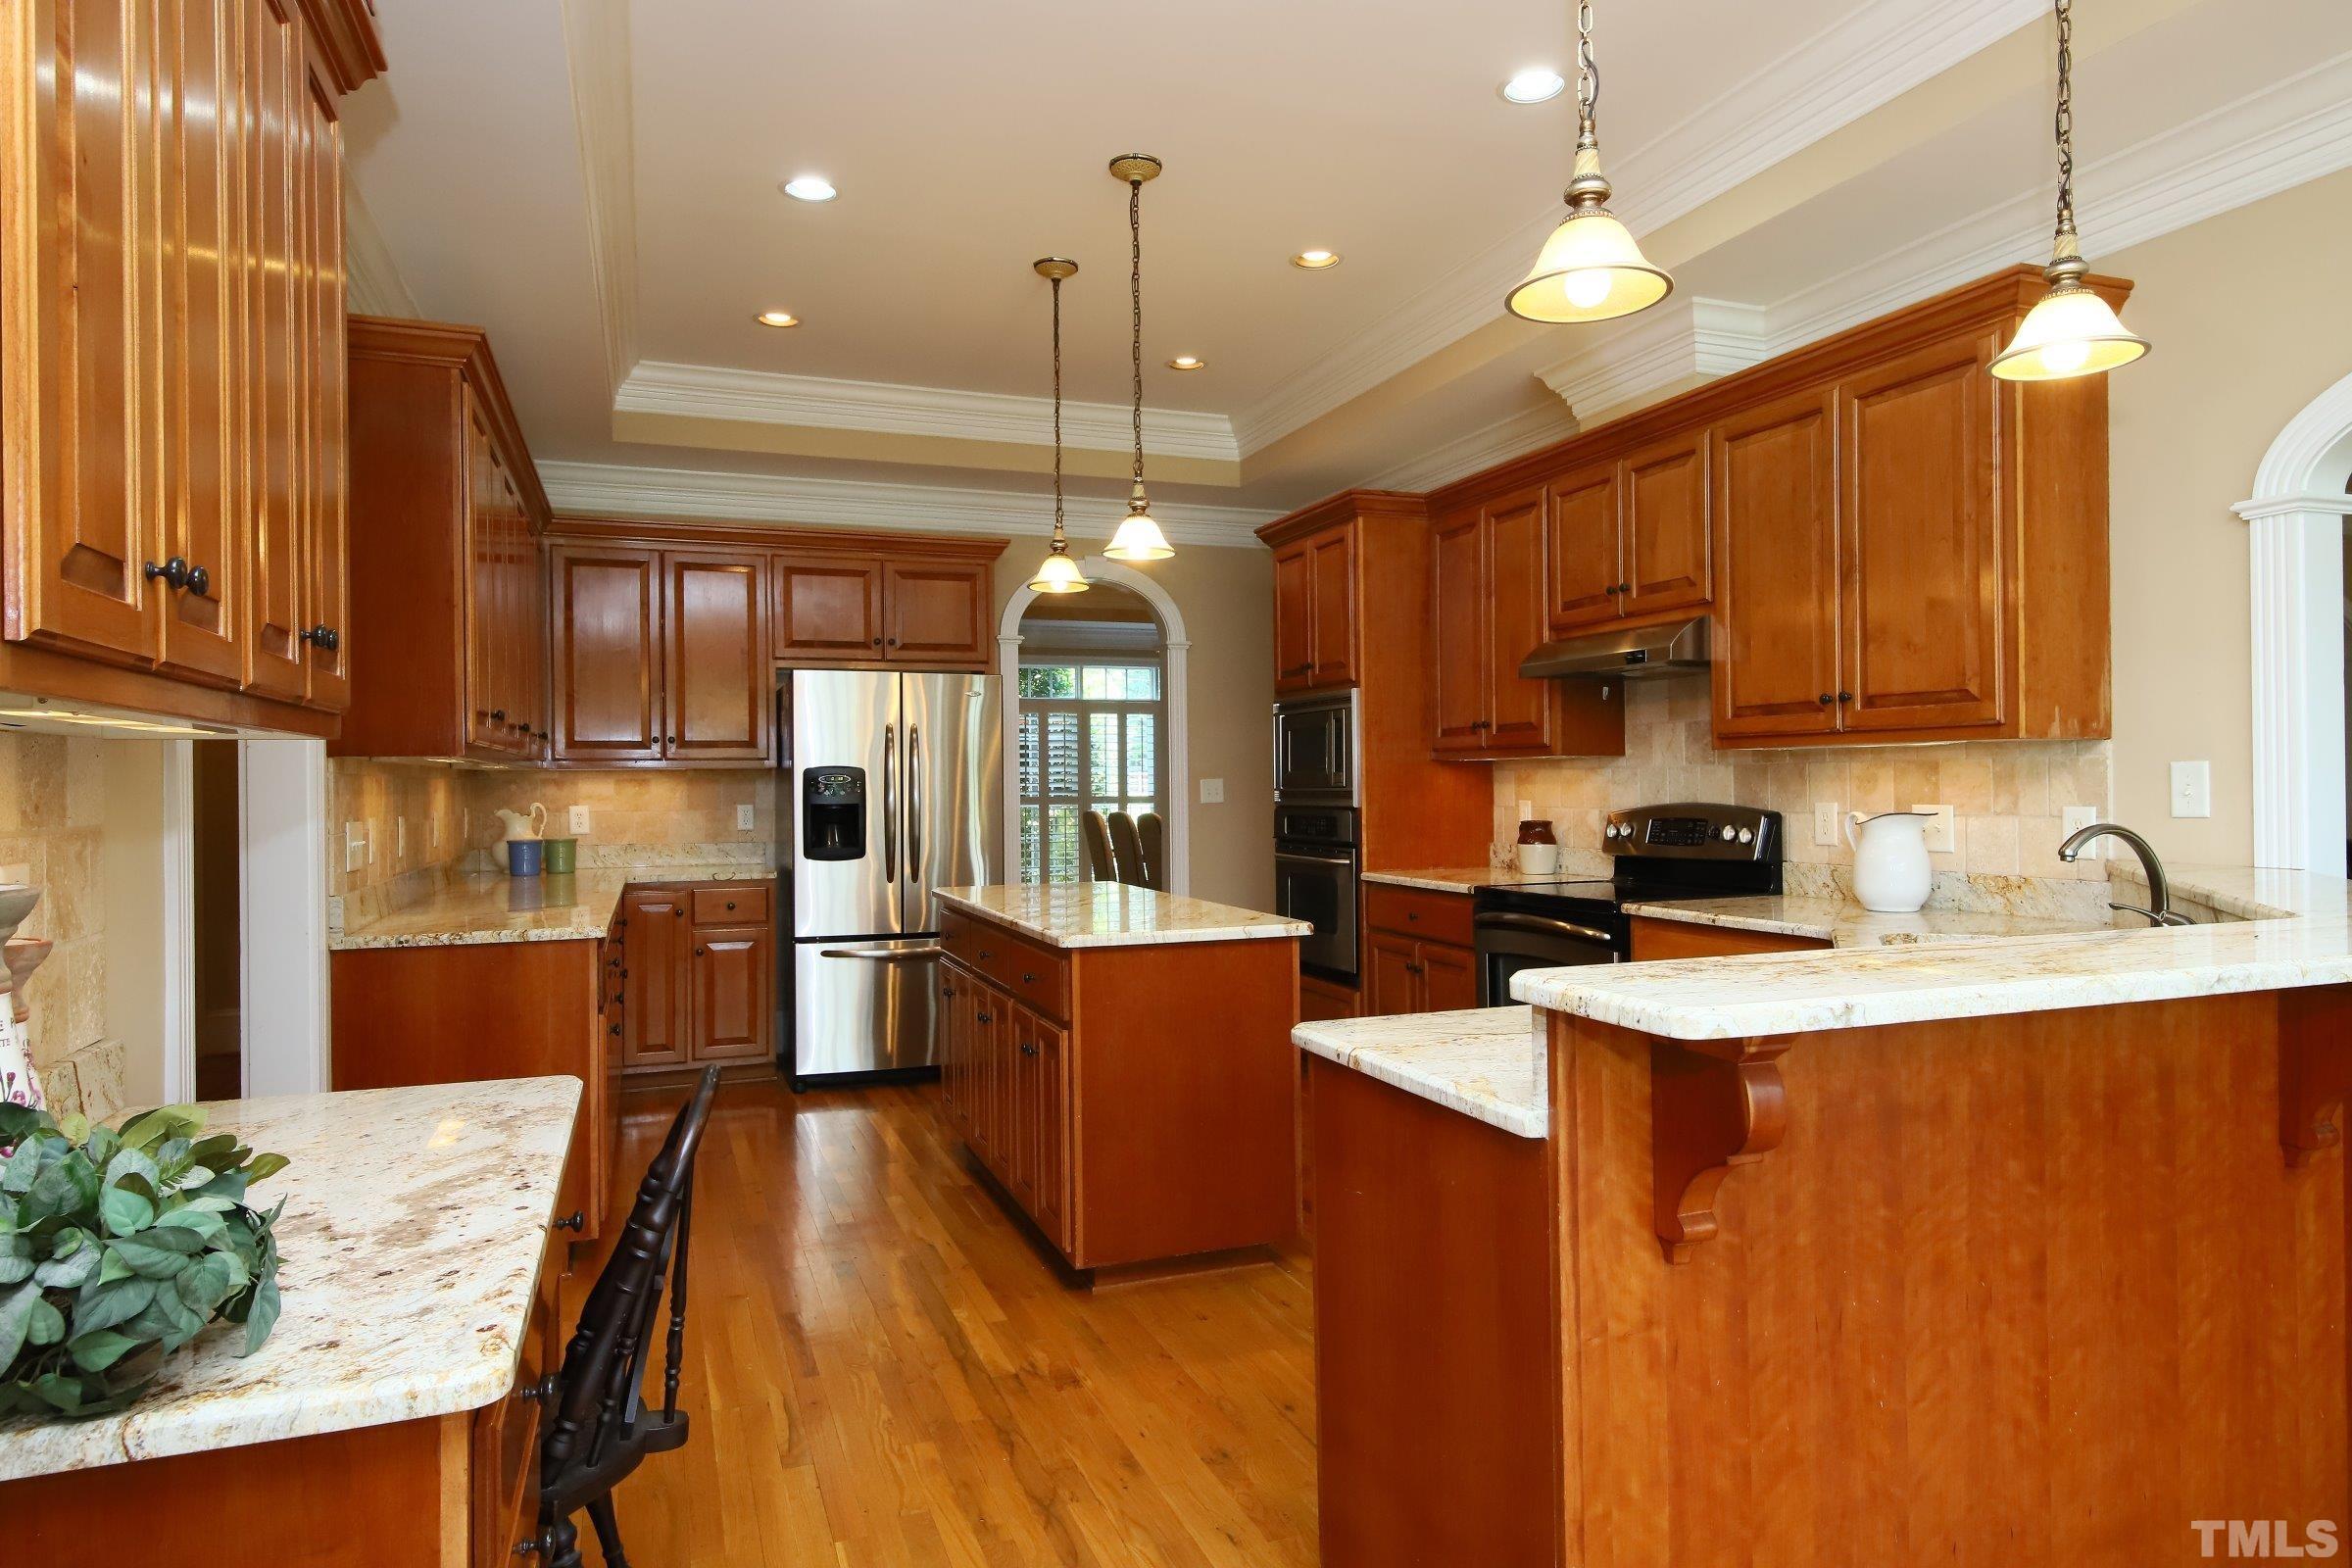 What a kitchen! Room for all the culinary artists with two ovens and yards of countertop space.